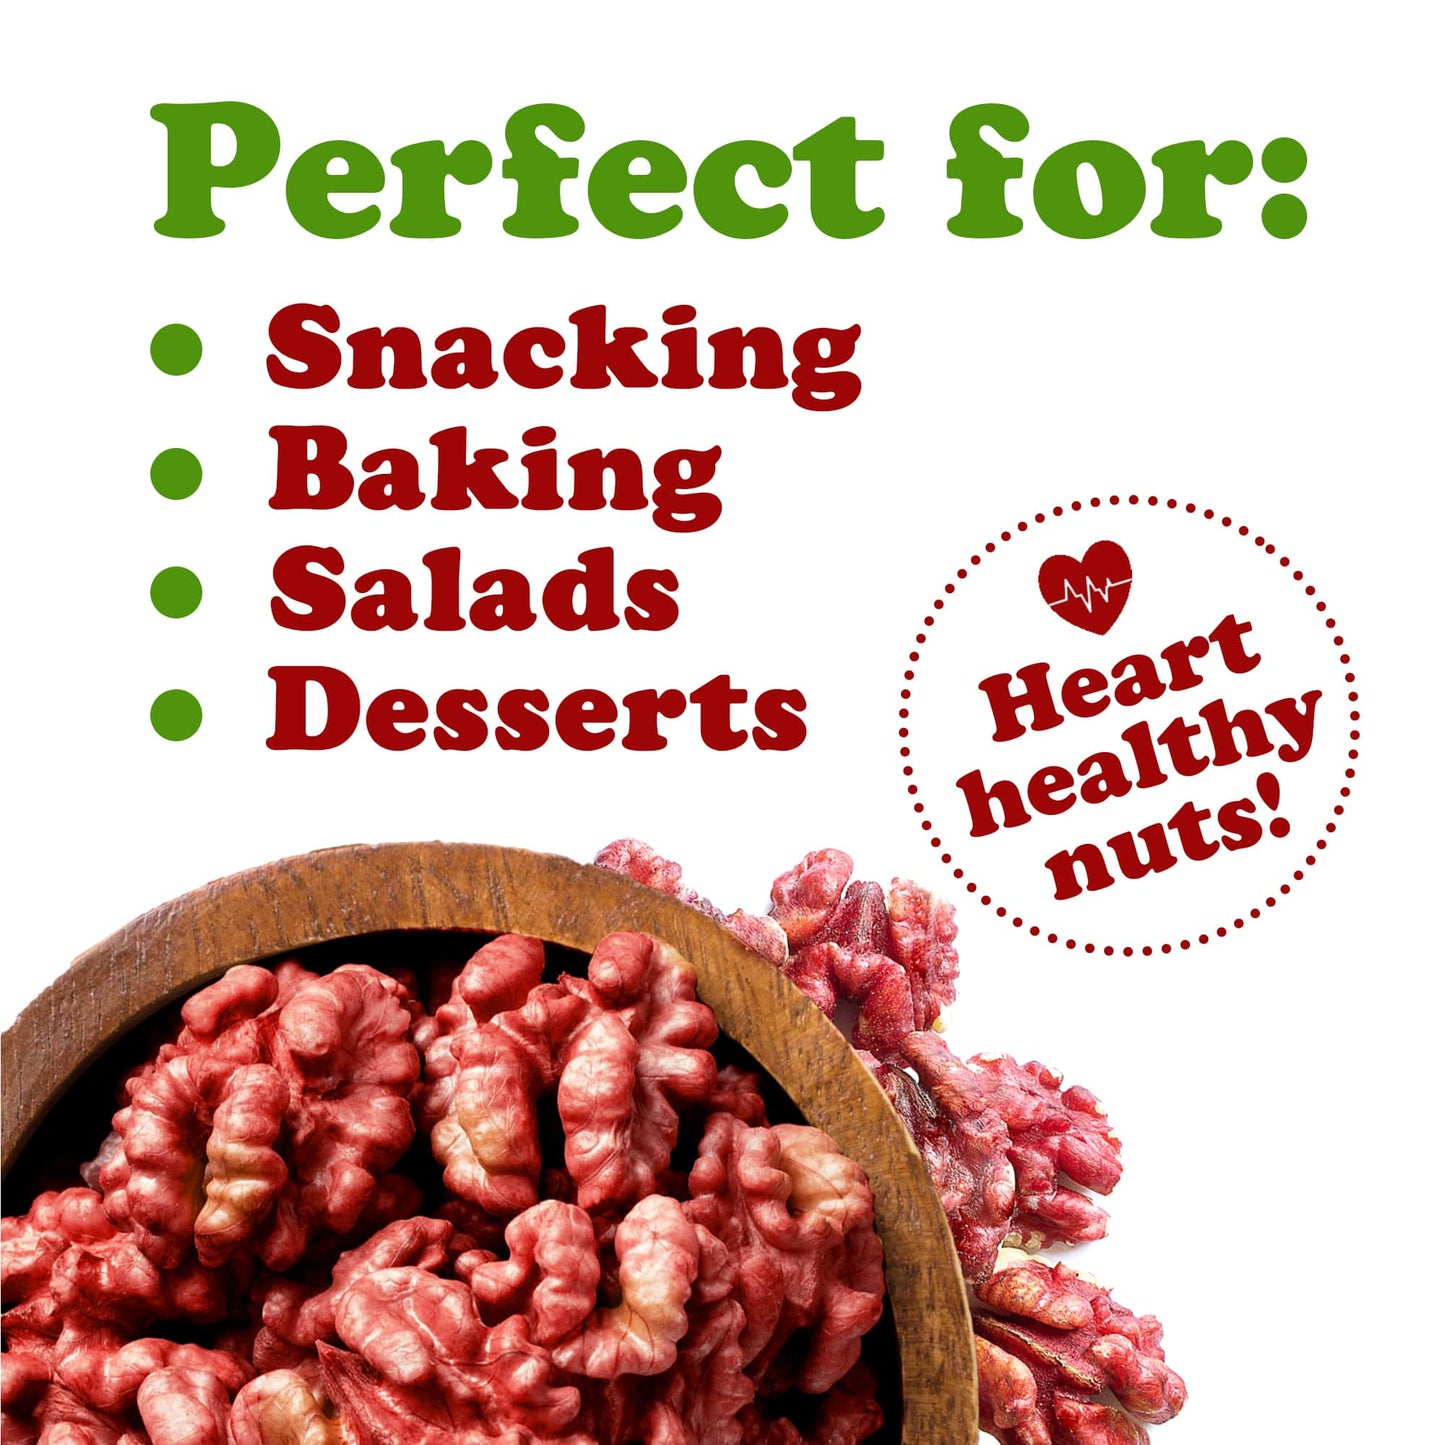 California Red Walnuts — Non-GMO Verified, Raw, No Shell, Kosher, Unsalted, Natural, Sirtfood, Bulk - by Food to Live